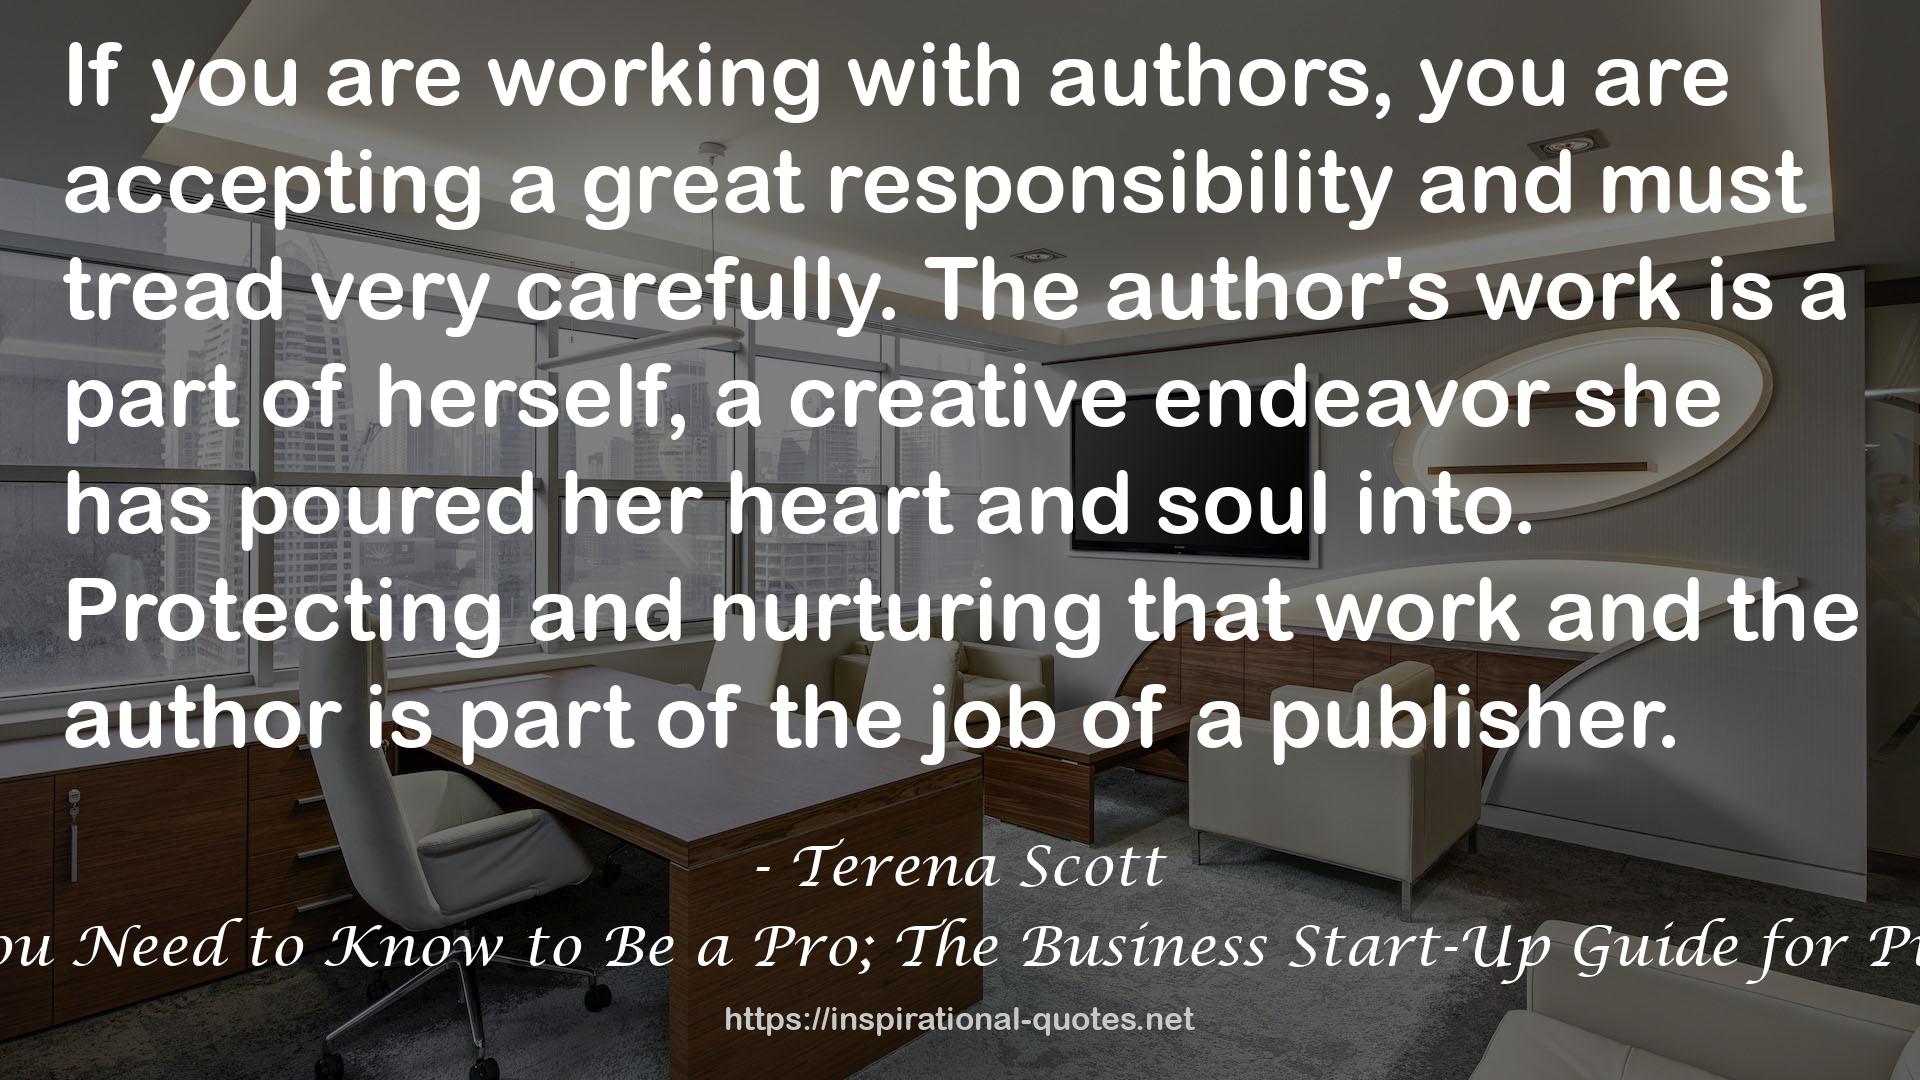 What You Need to Know to Be a Pro; The Business Start-Up Guide for Publishers QUOTES